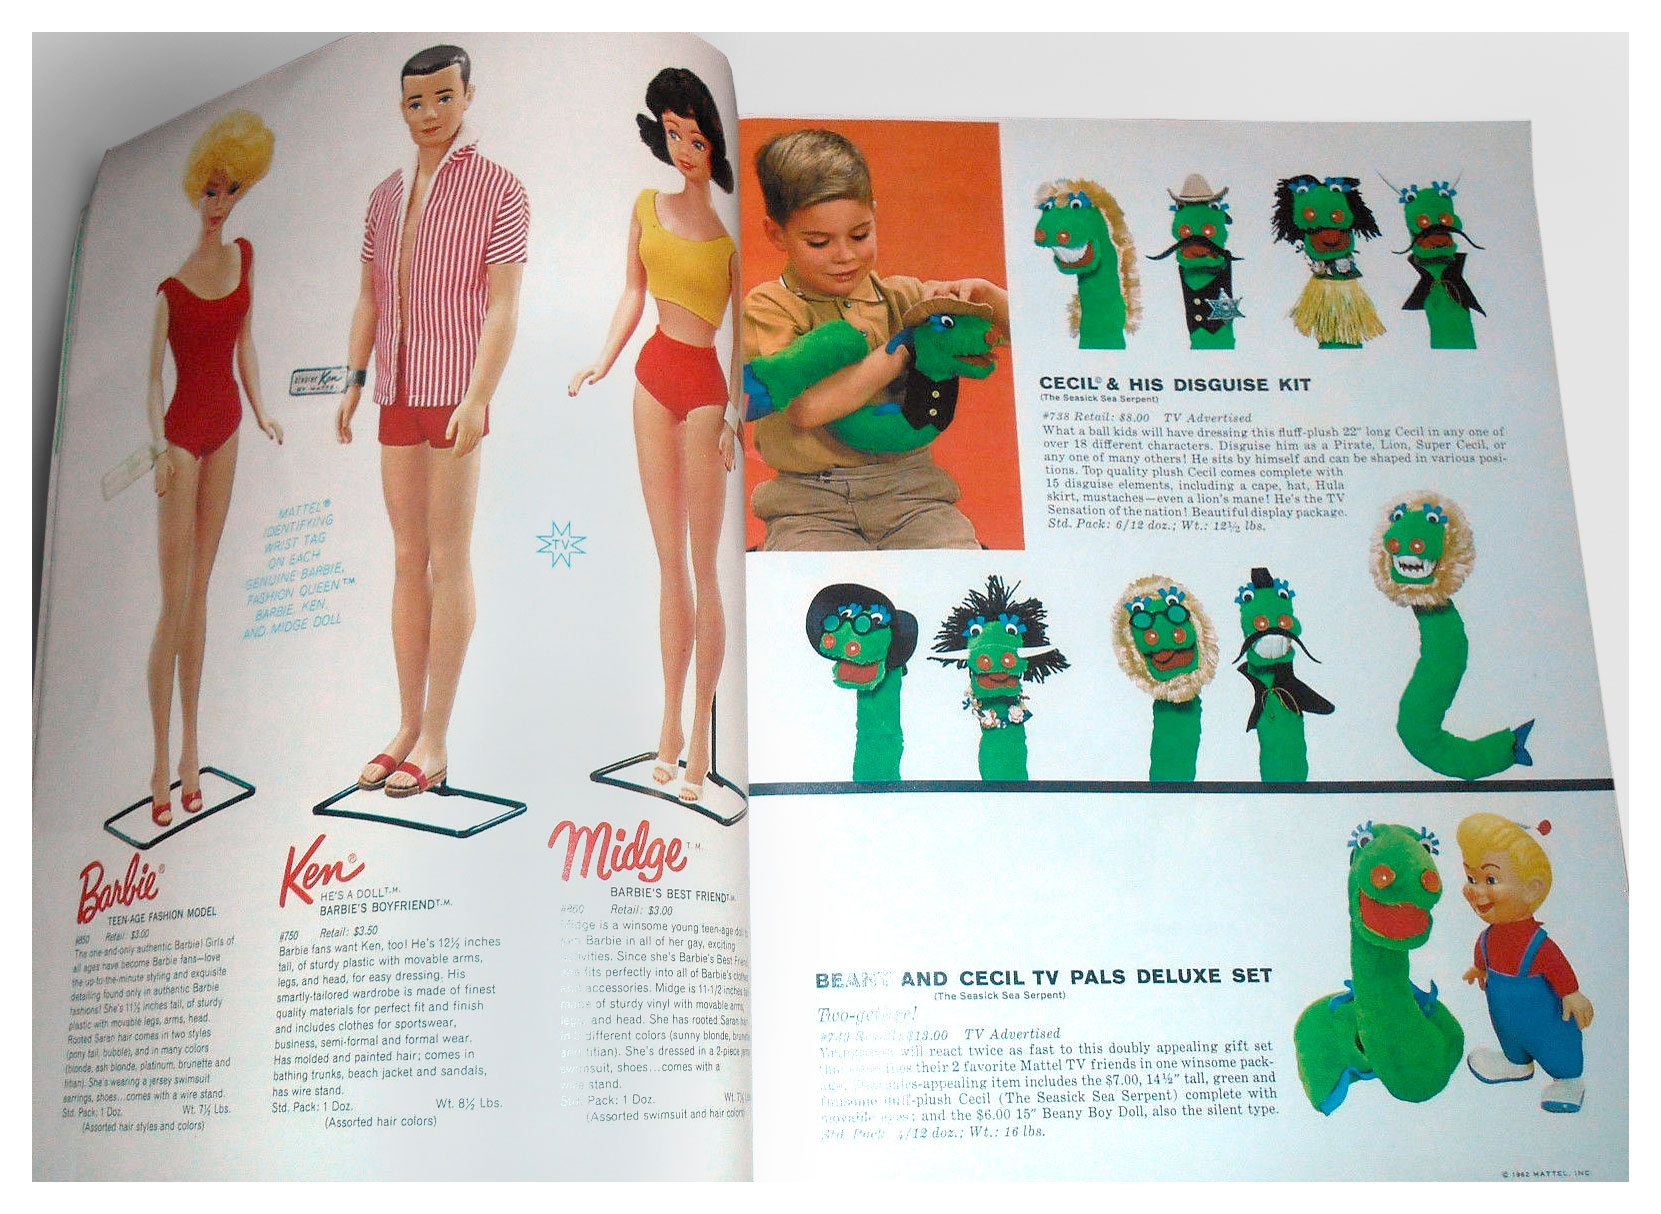 From Mattel Dolls For Fall '62 catalogue (2nd edition only)